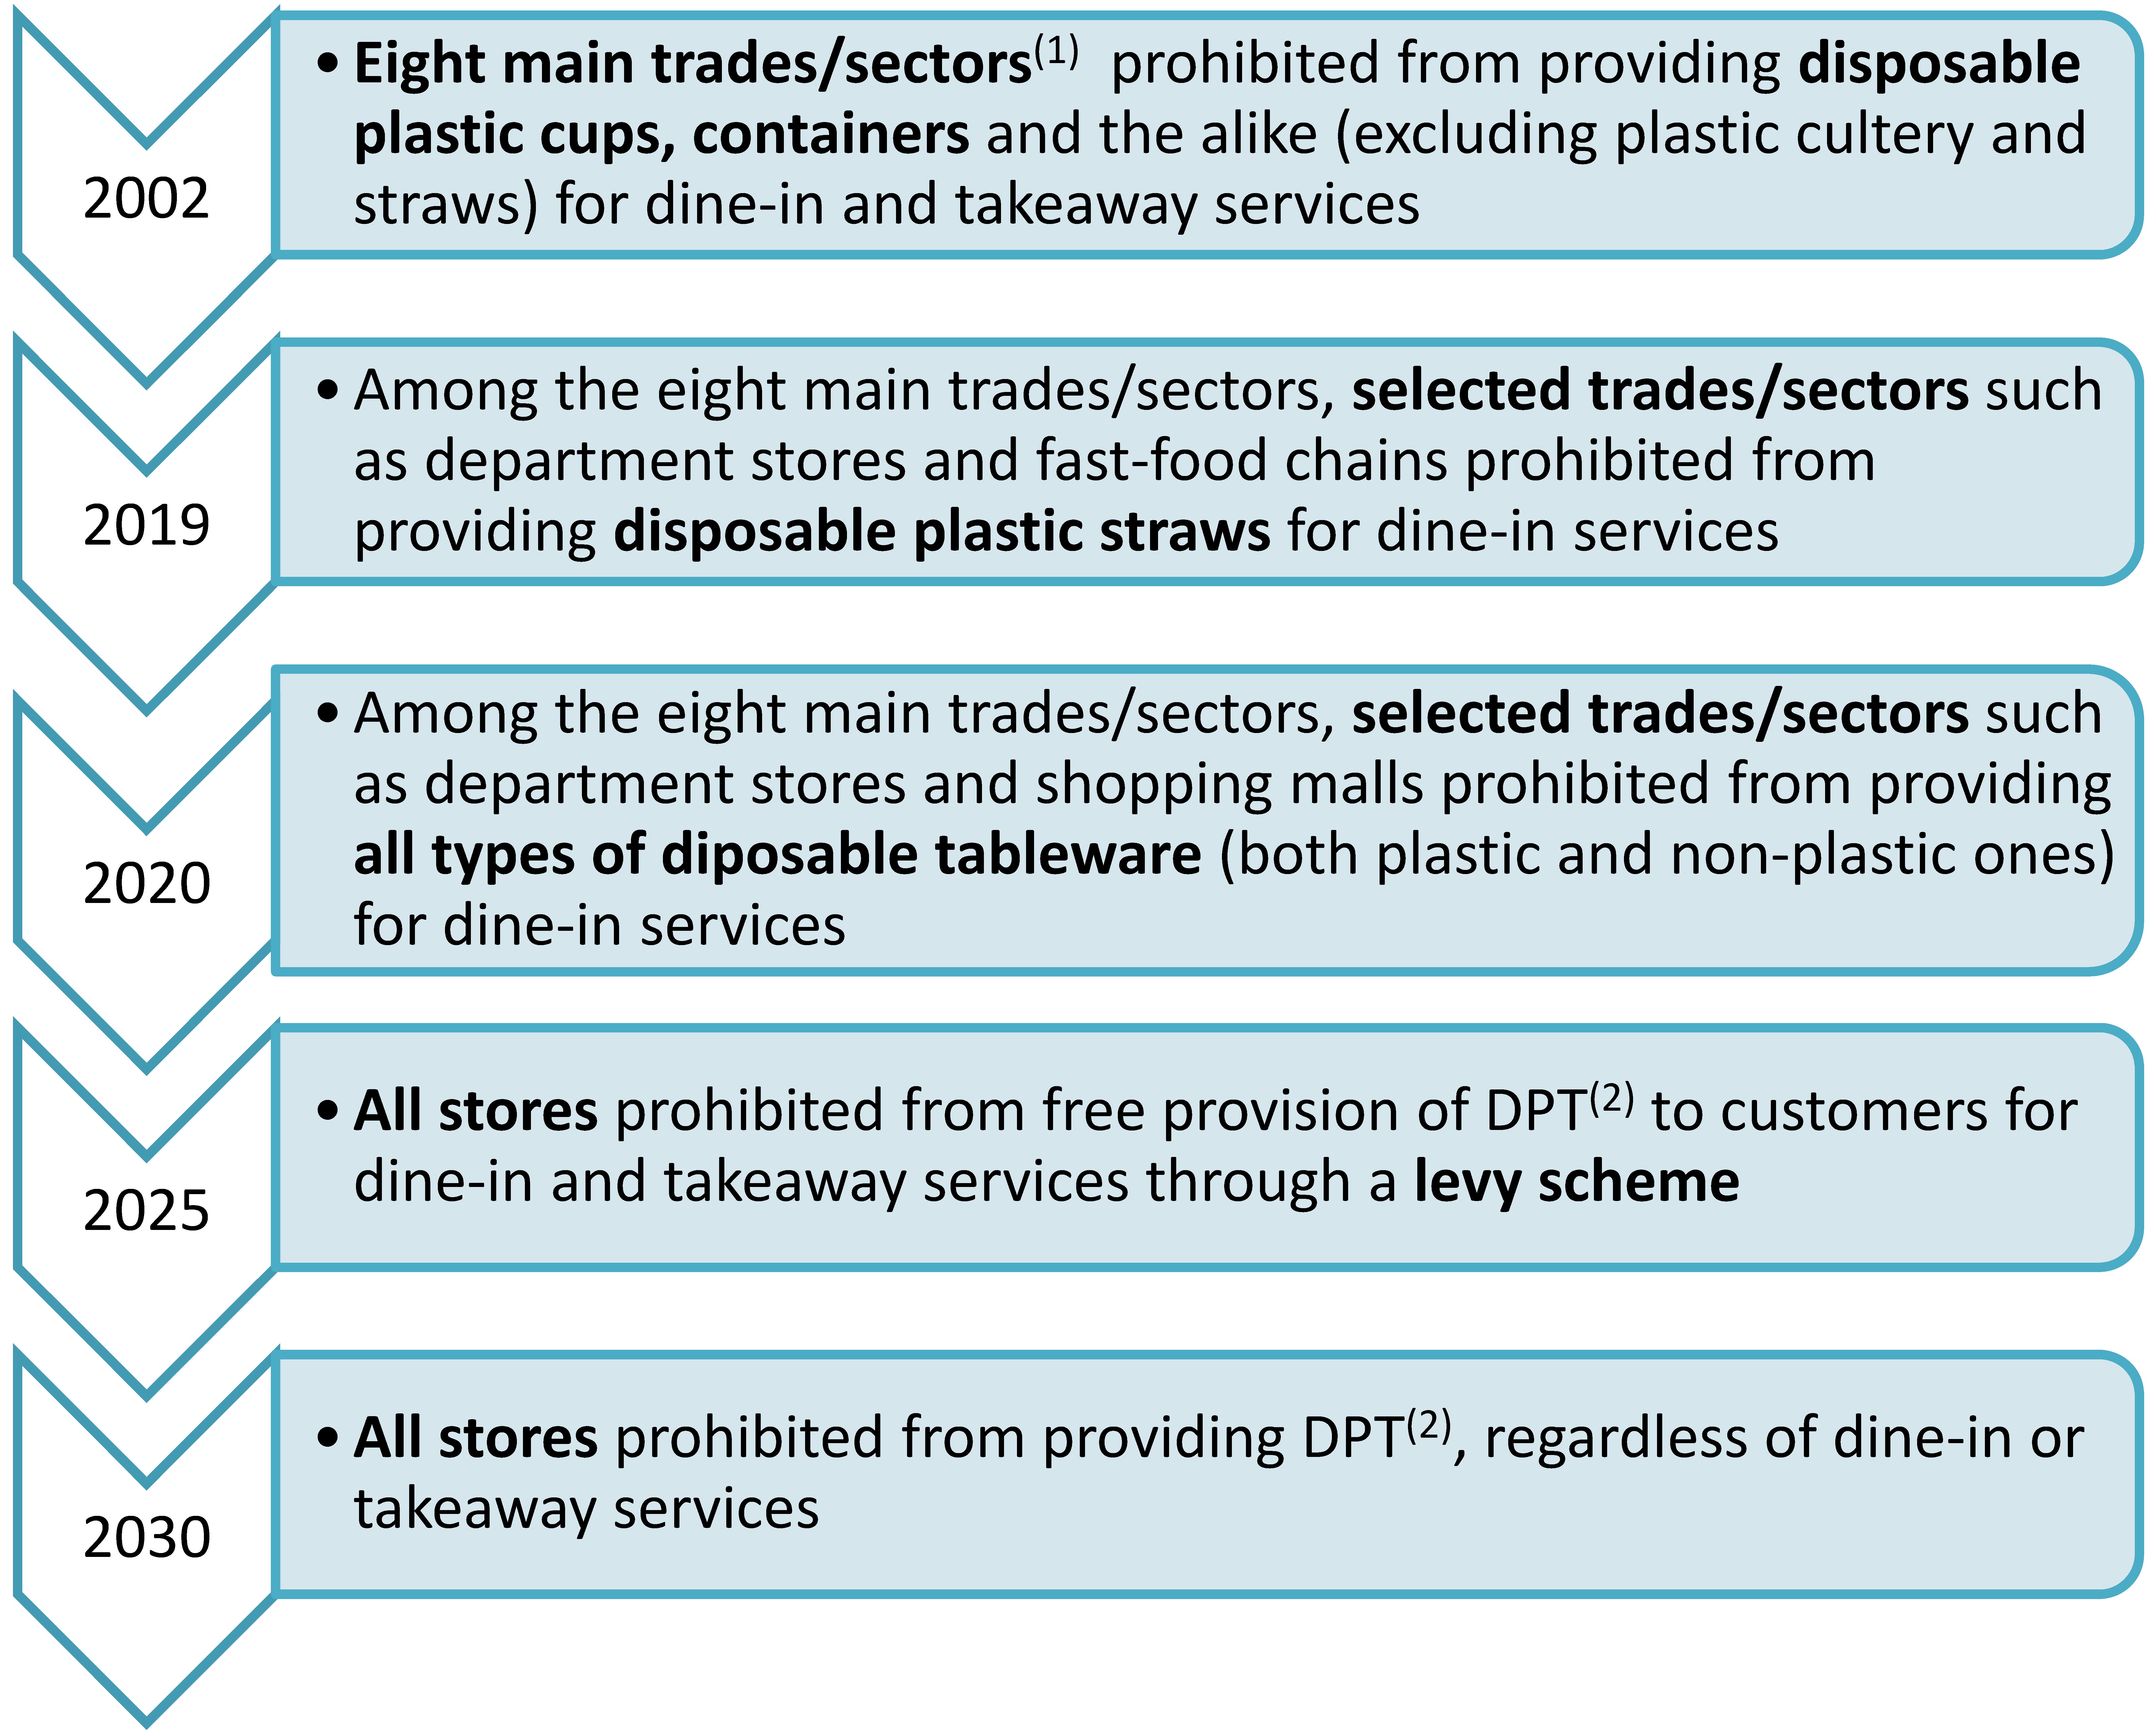 Table 2 - Timeline of major DPT regulation in Taiwan